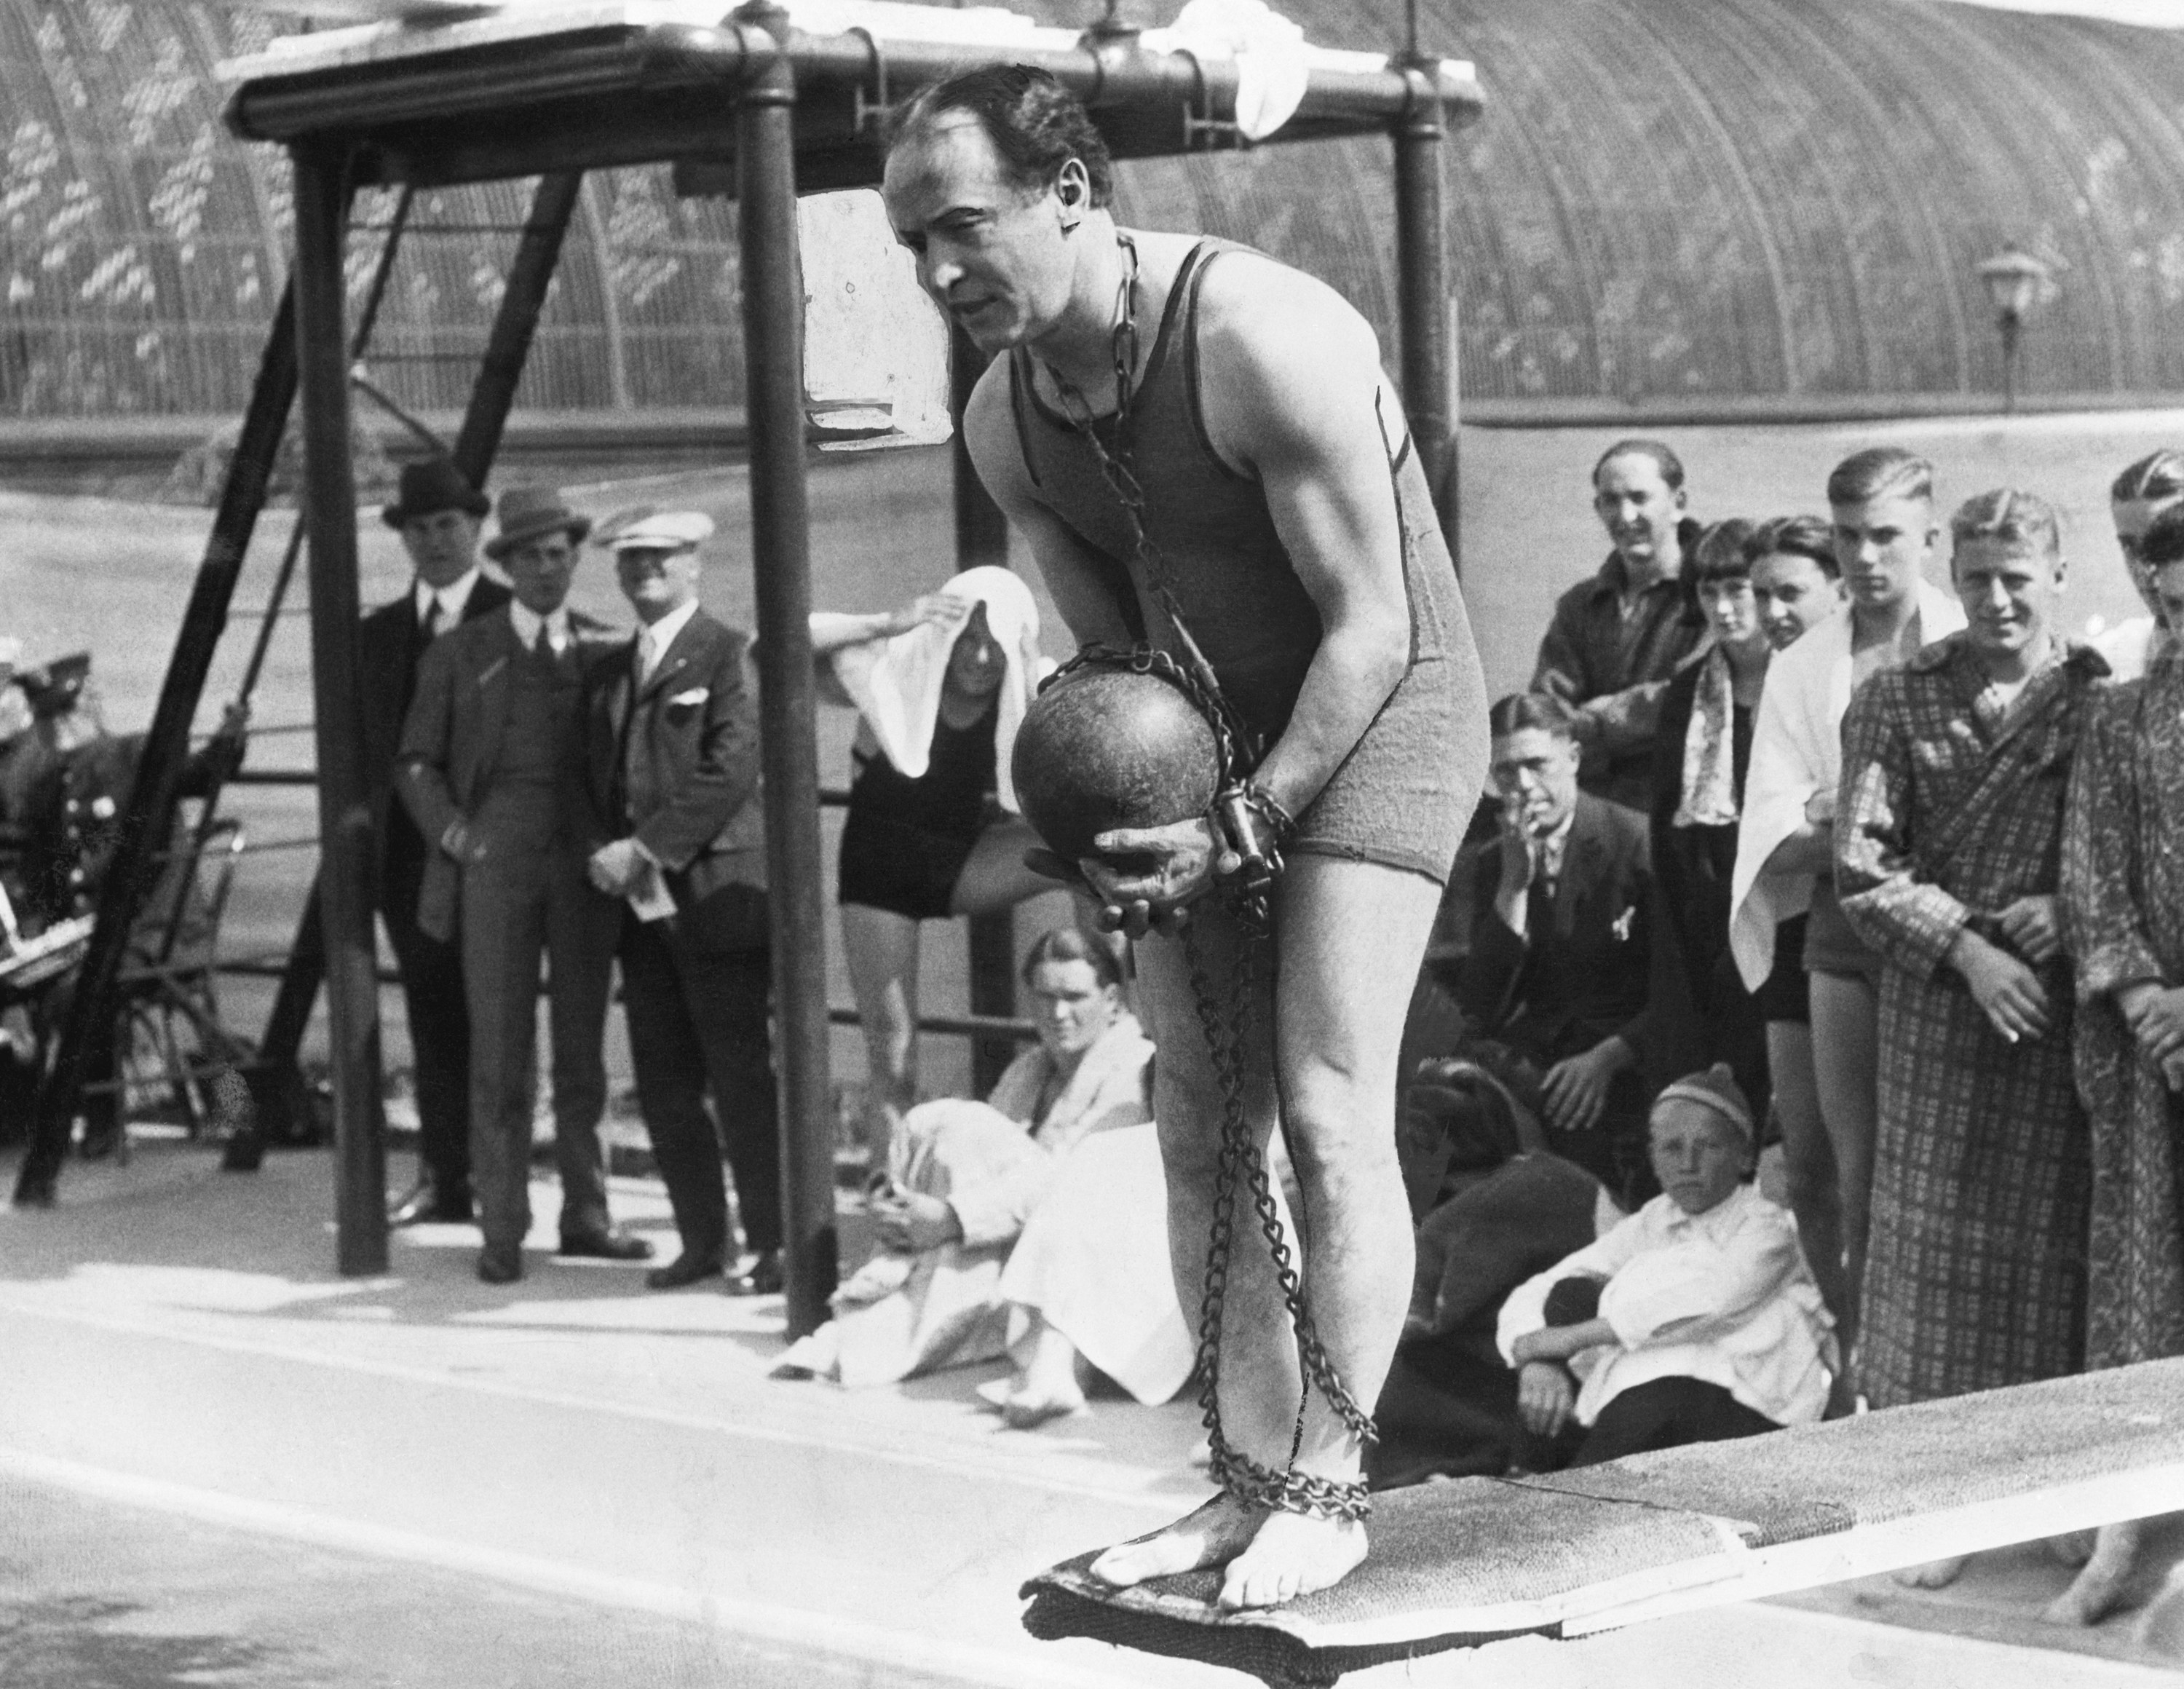 Harry Houdini on diving board with ball and chain about to perform a stunt